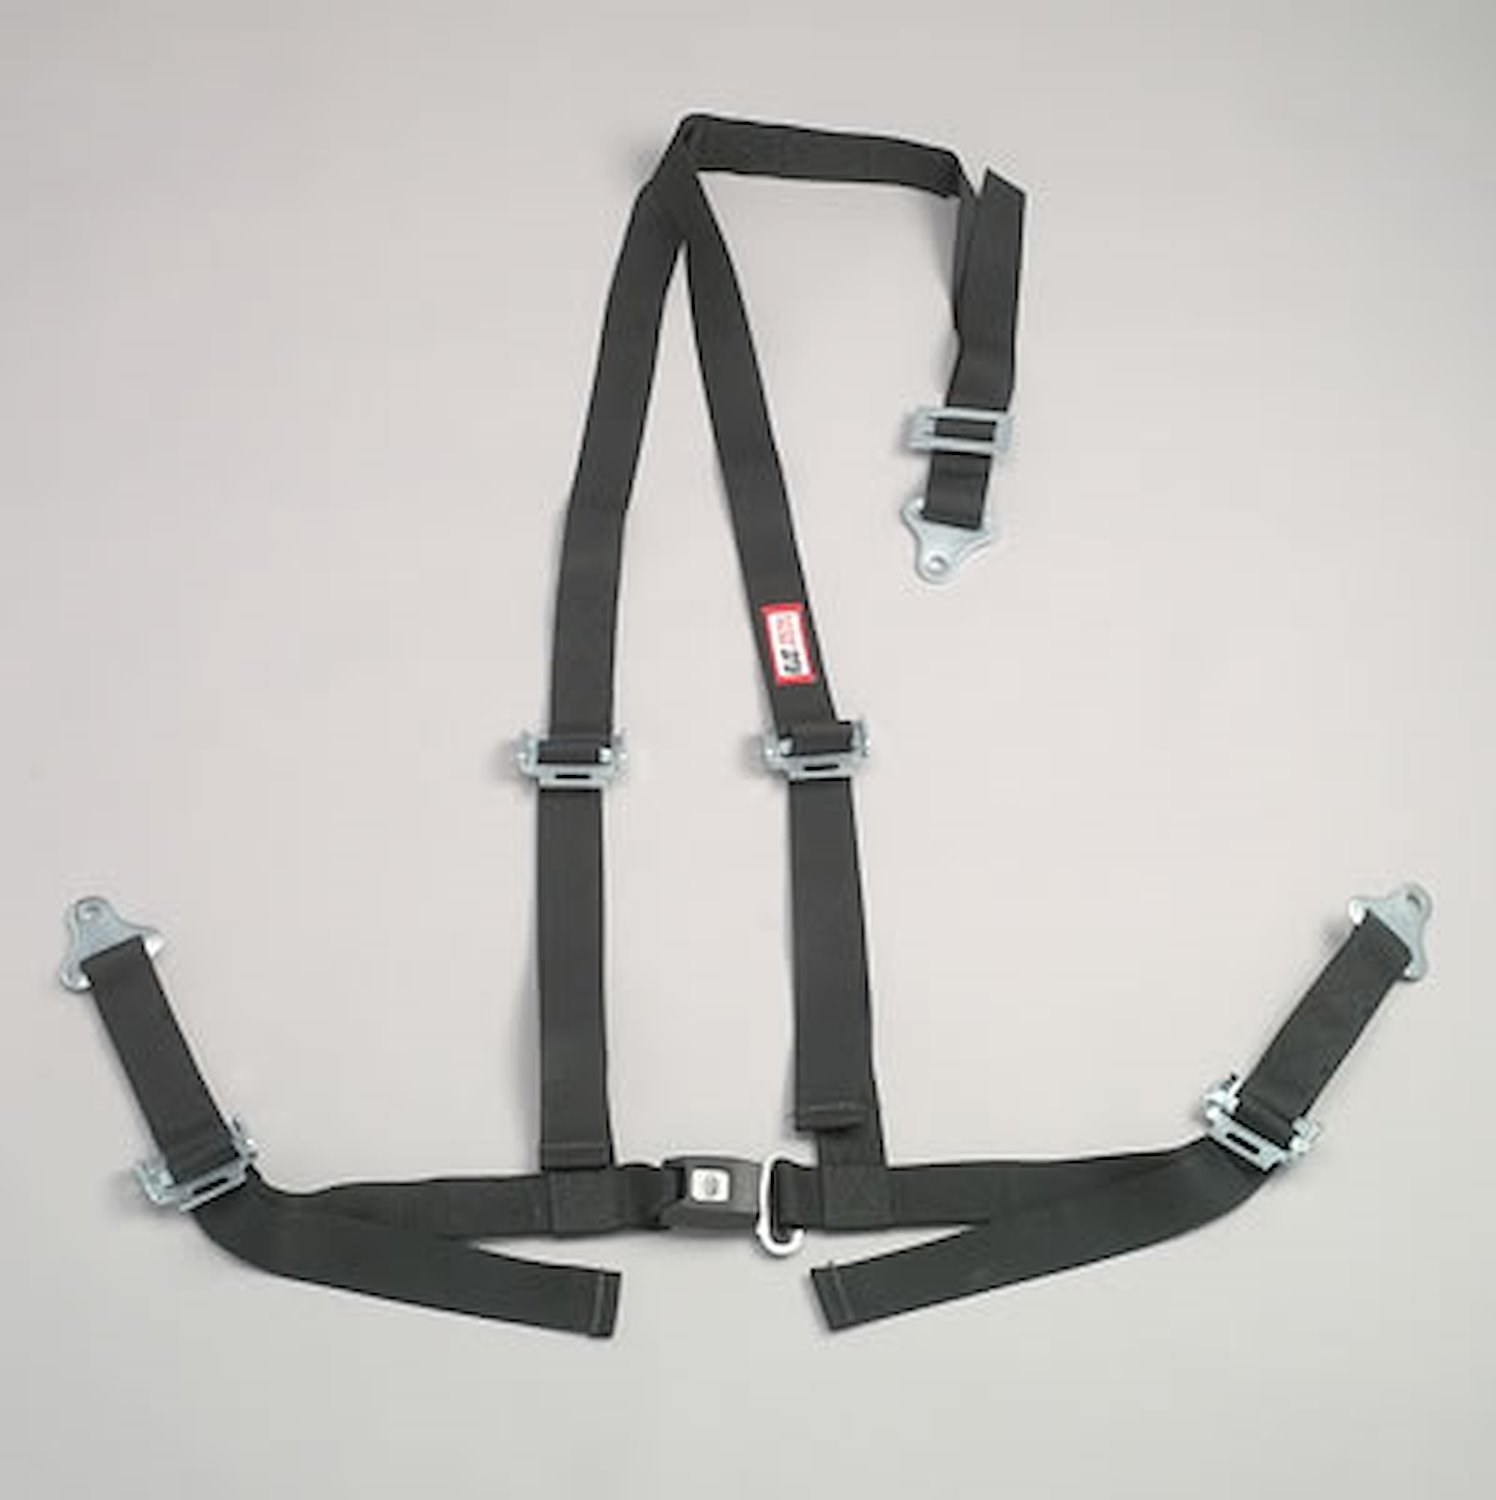 NON-SFI B&T HARNESS 2 PULL UP Lap Belt SNAP 2 S. H. Y FLOOR Mount WRAP/BOLT OD GREEN